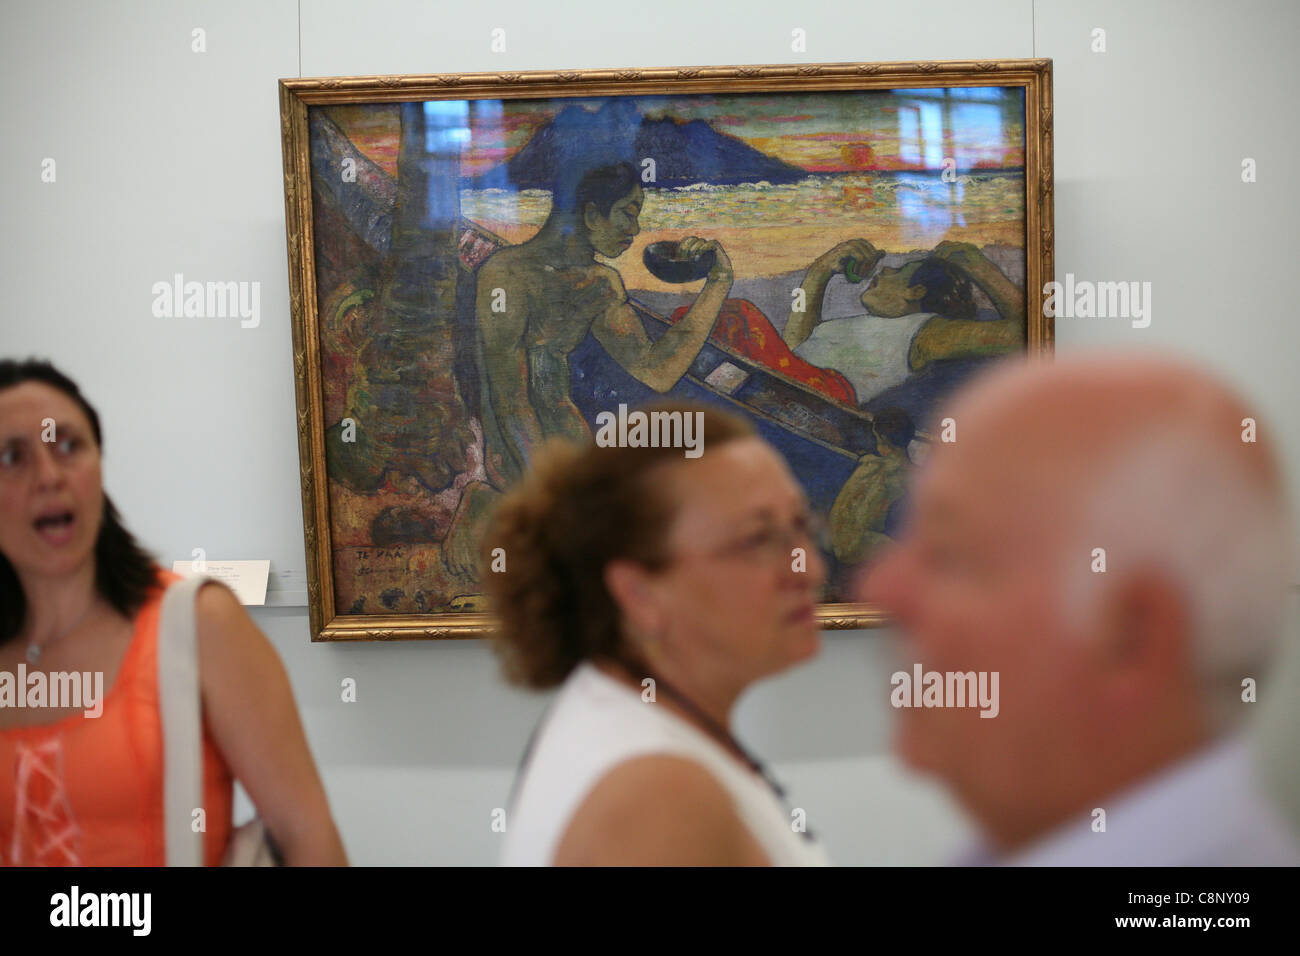 Canoe. Tahitian Family. Visitors in front of the painting by Paul Gauguin in the Hermitage Museum in St Petersburg, Russia. Stock Photo